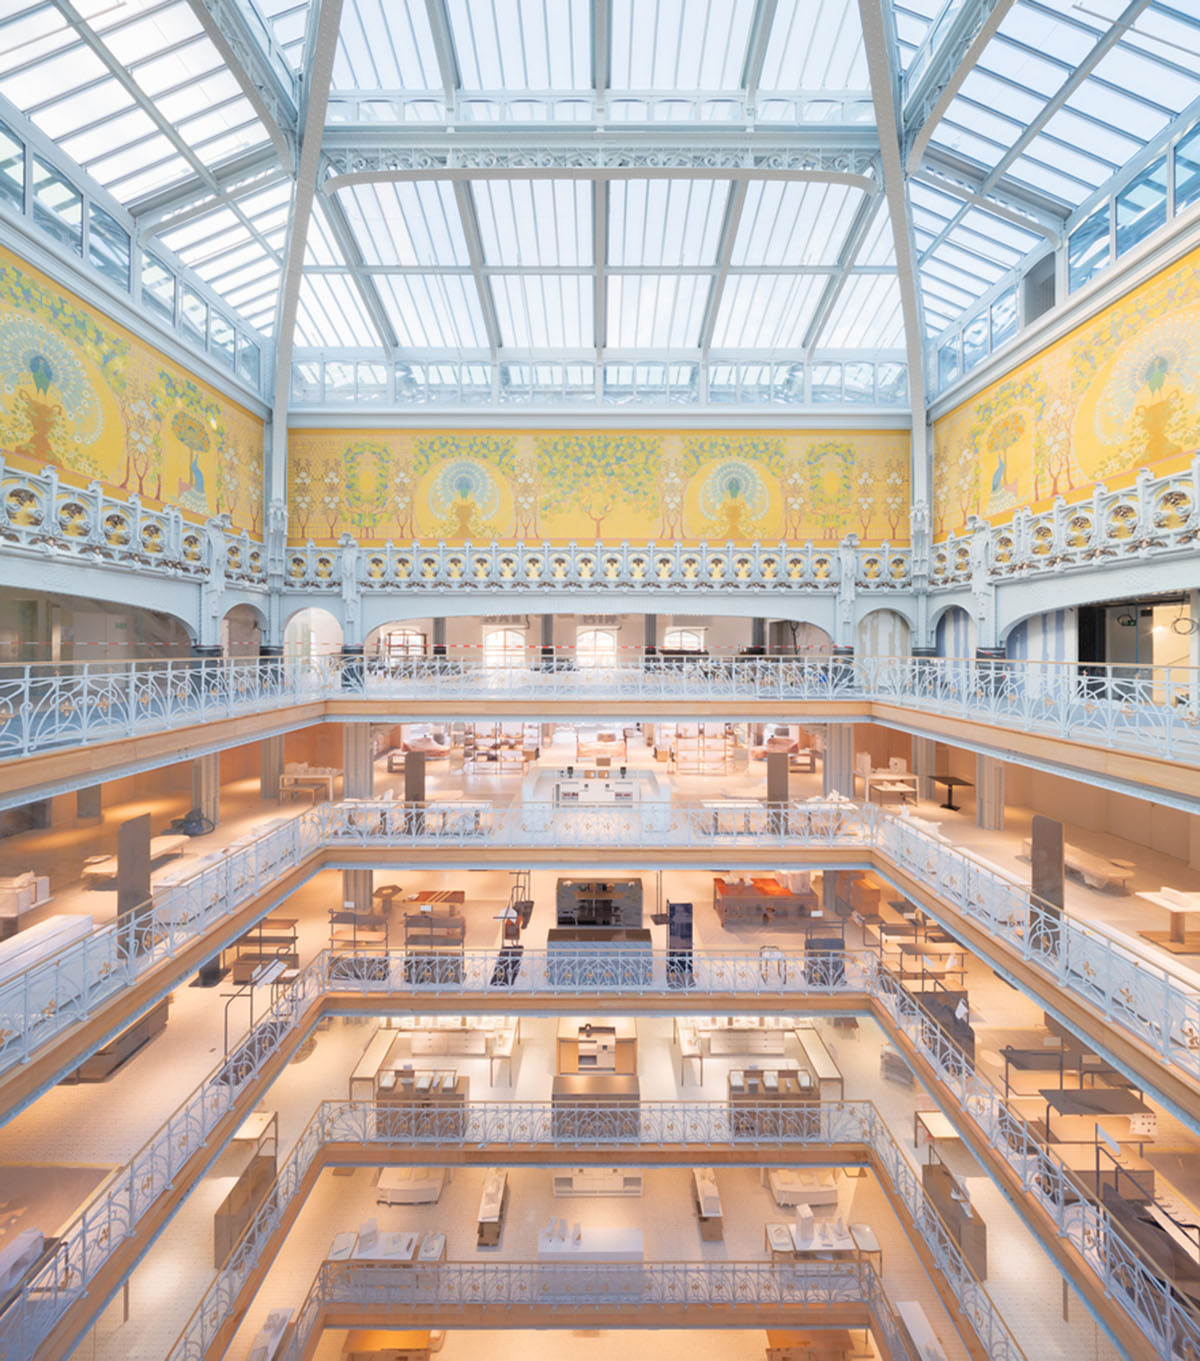 Samaritaine reopens after an exceptional renovation by SANAA and